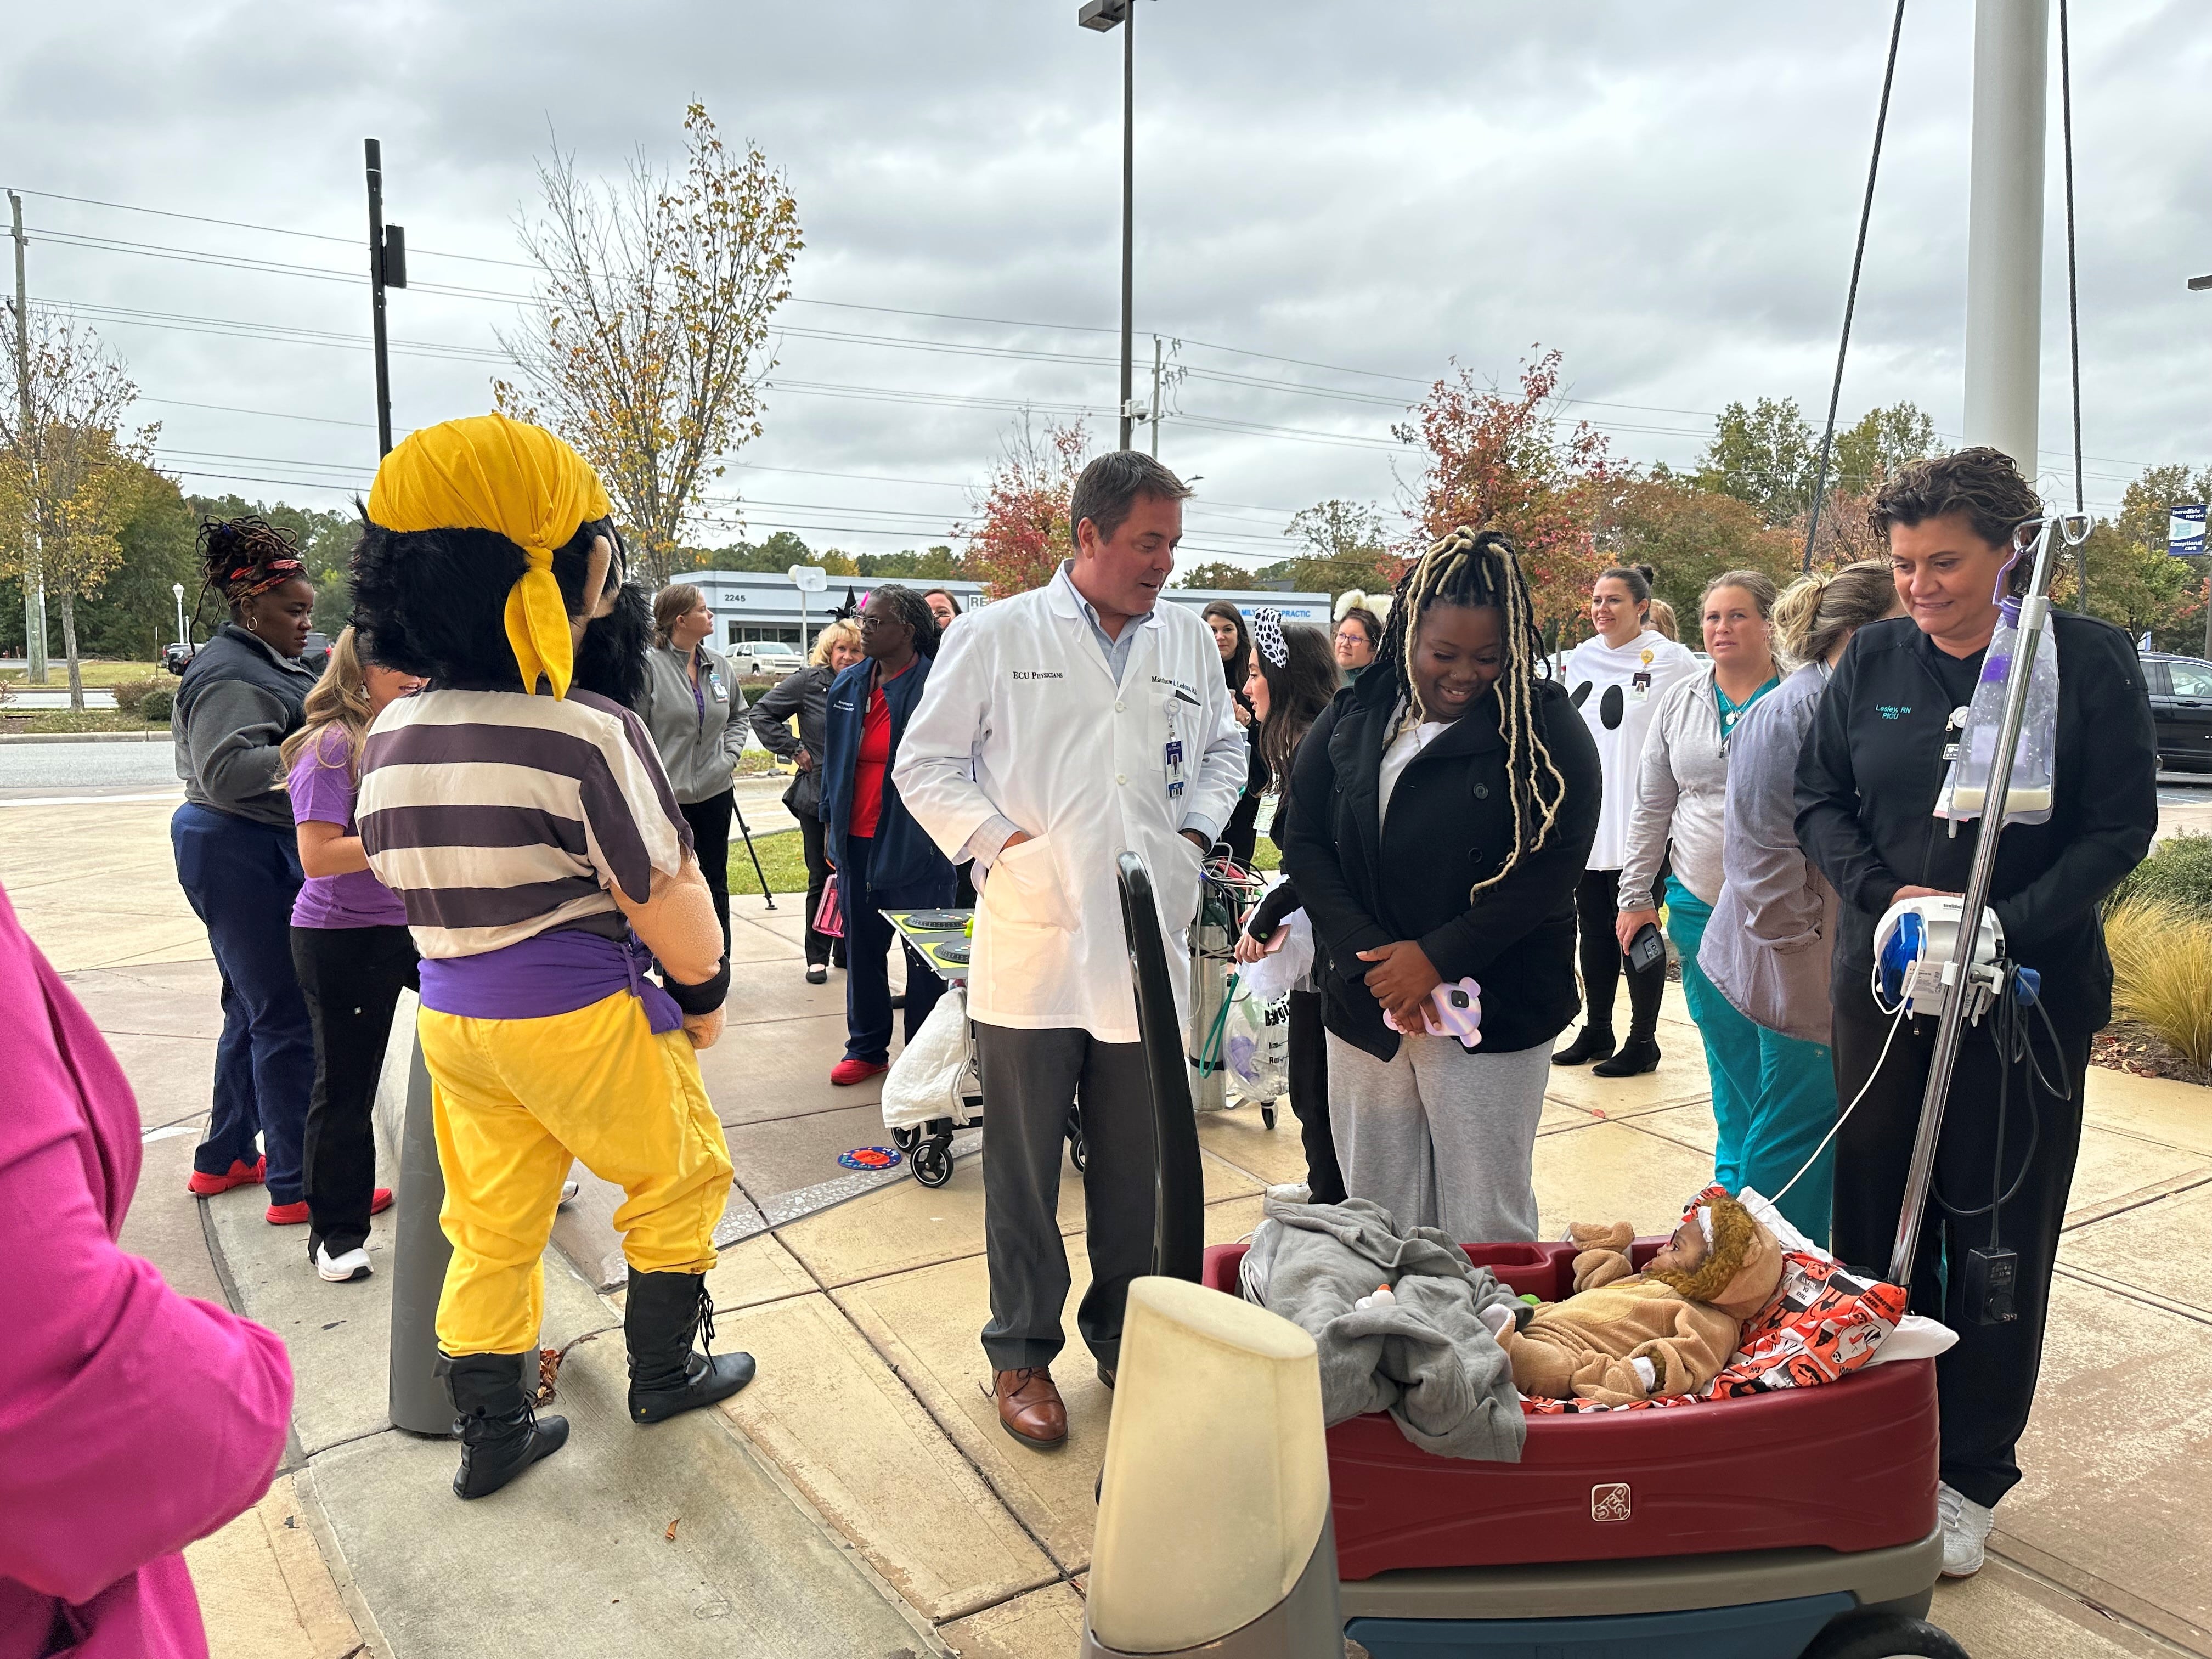 Dr. Matthew Ledoux speaks to the parent of a patient, who is riding in a red wagon and wearing a lion costume while attending the Maynard Children's Hospital Halloween parade.